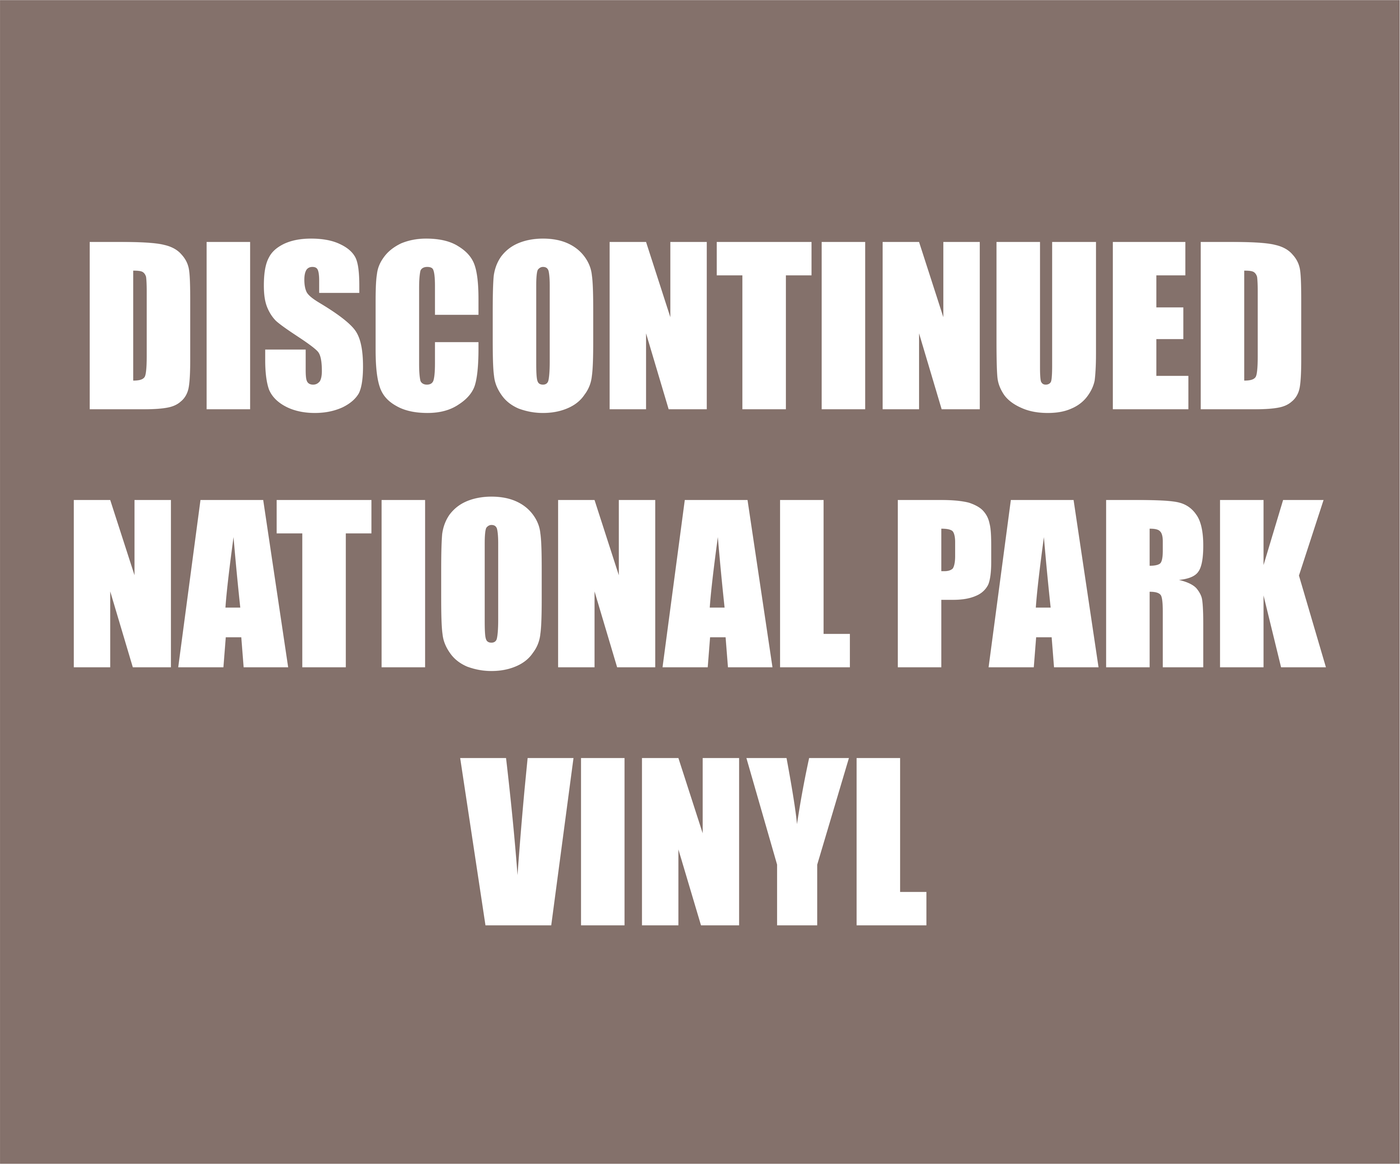 Adhesive Patterned Vinyl - Discontinued National Park